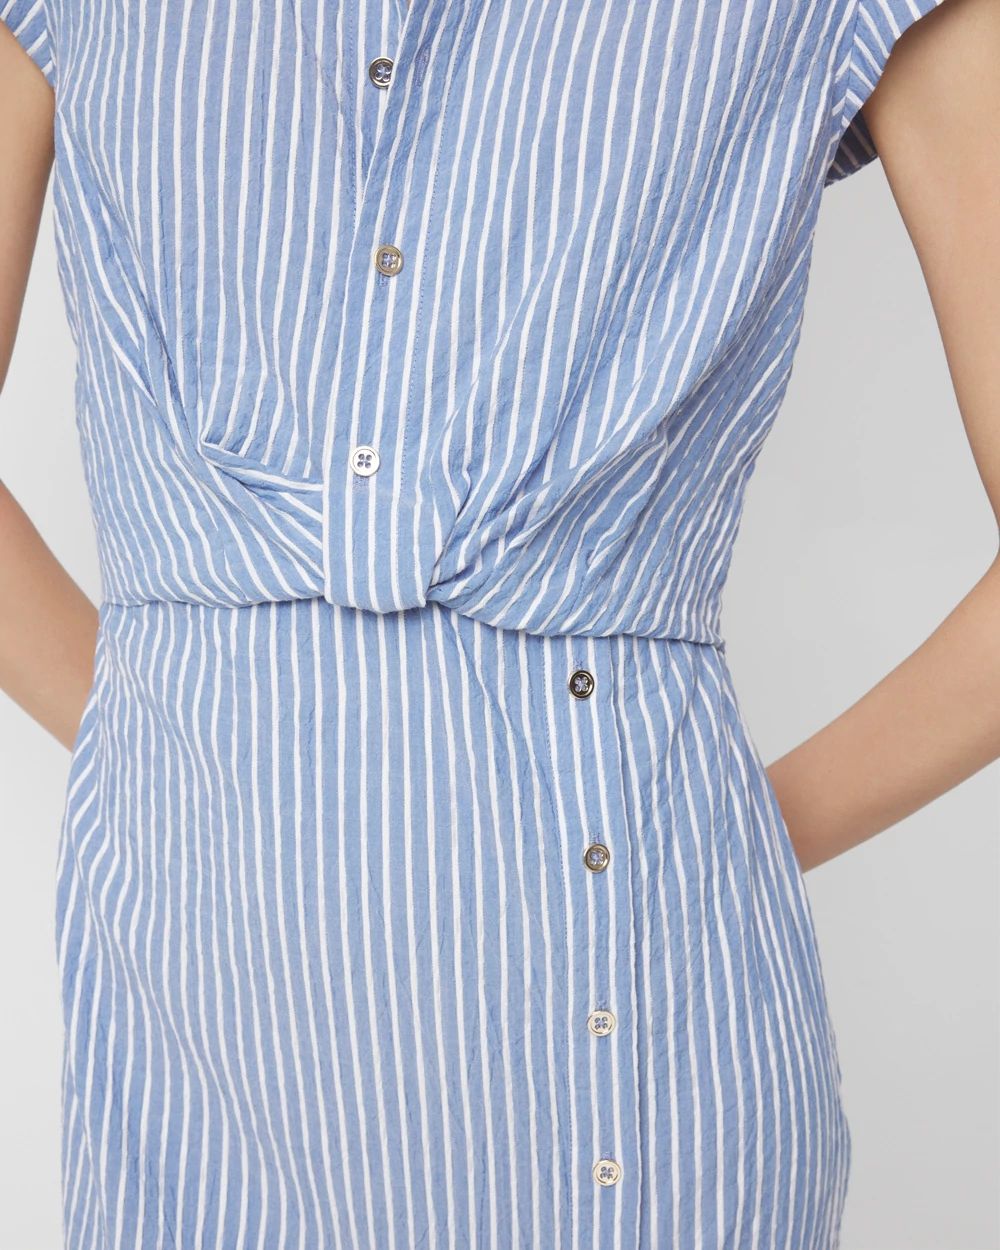 Petite Short Sleeve Button Detail Dress click to view larger image.